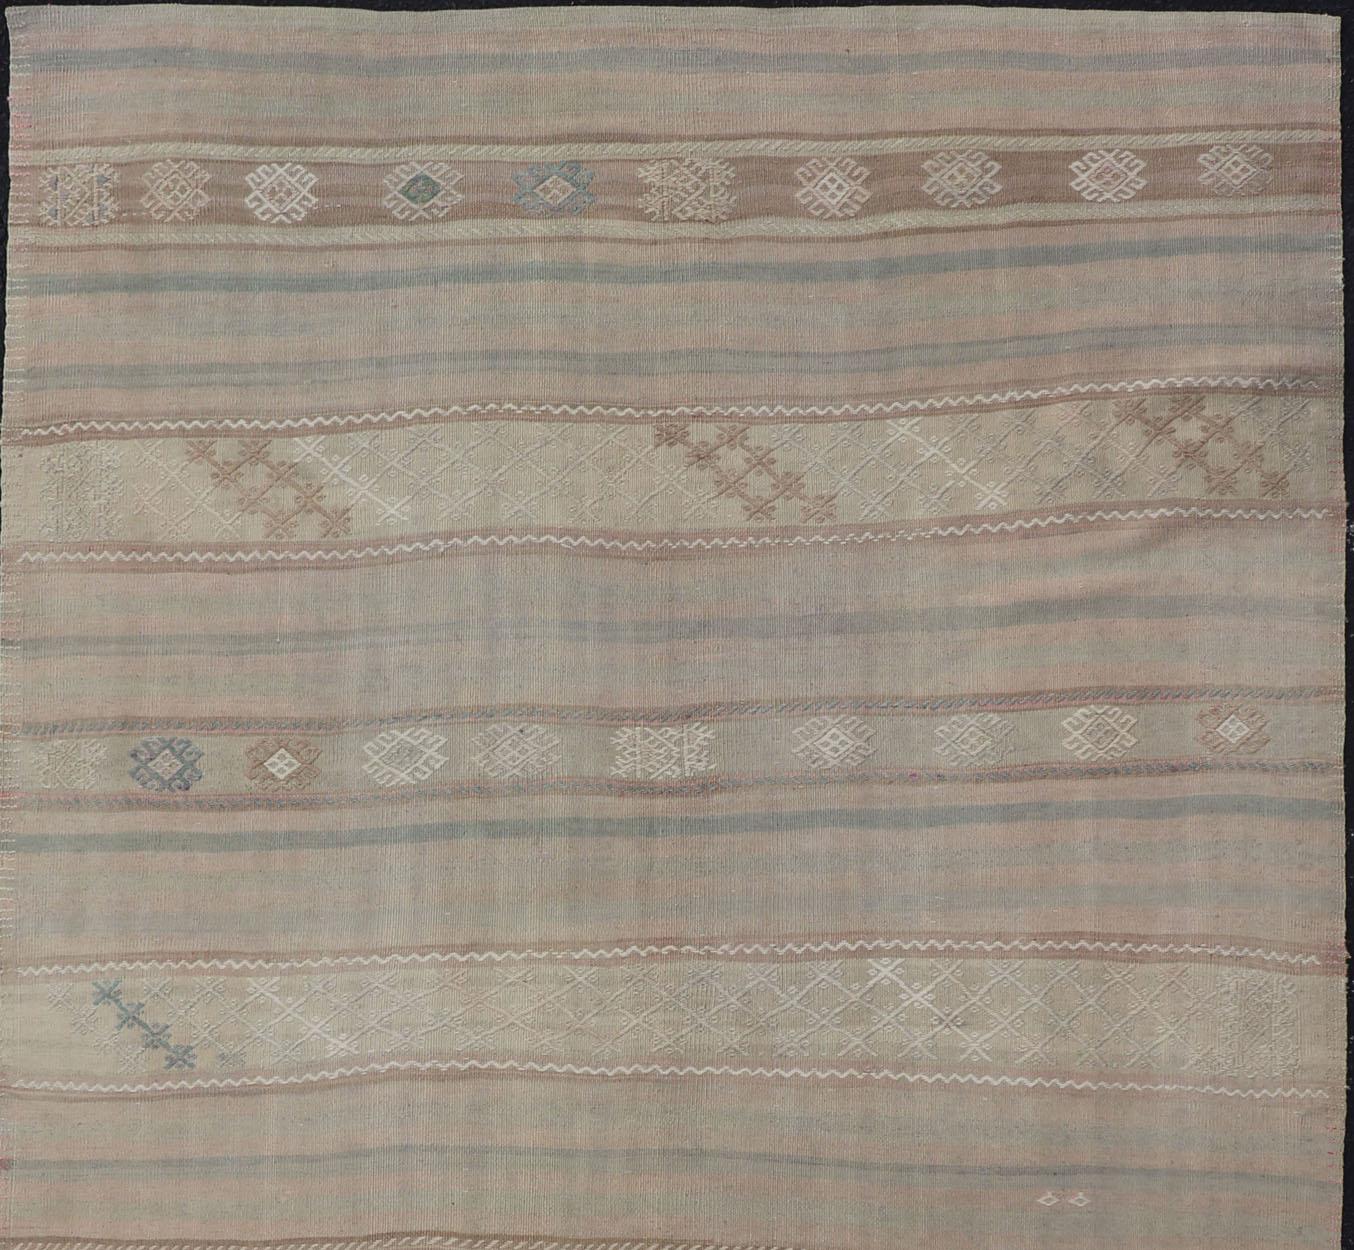 Flat-Weave Turkish Kilim with Embroideries in Earthy Tones and Hints of Pink In Good Condition For Sale In Atlanta, GA